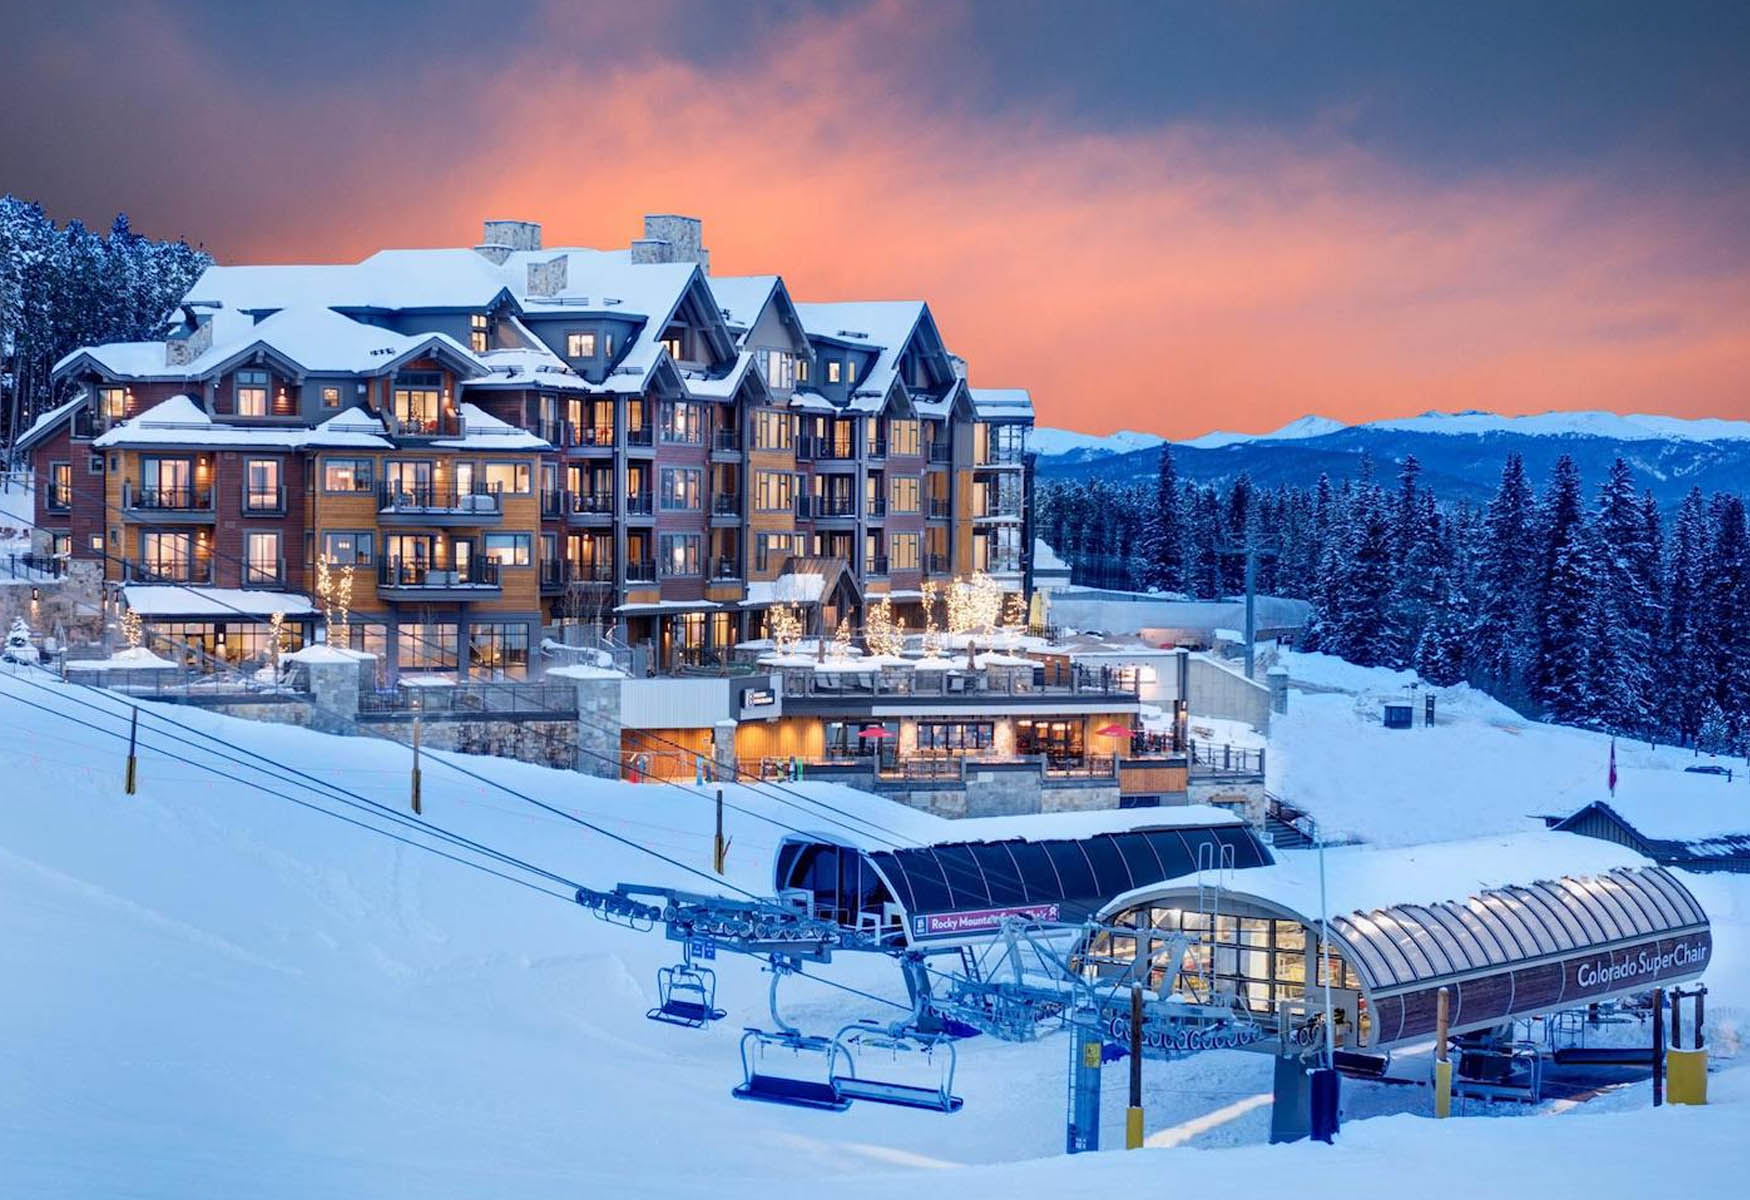 Where To Stay In Breckenridge: The BEST Areas